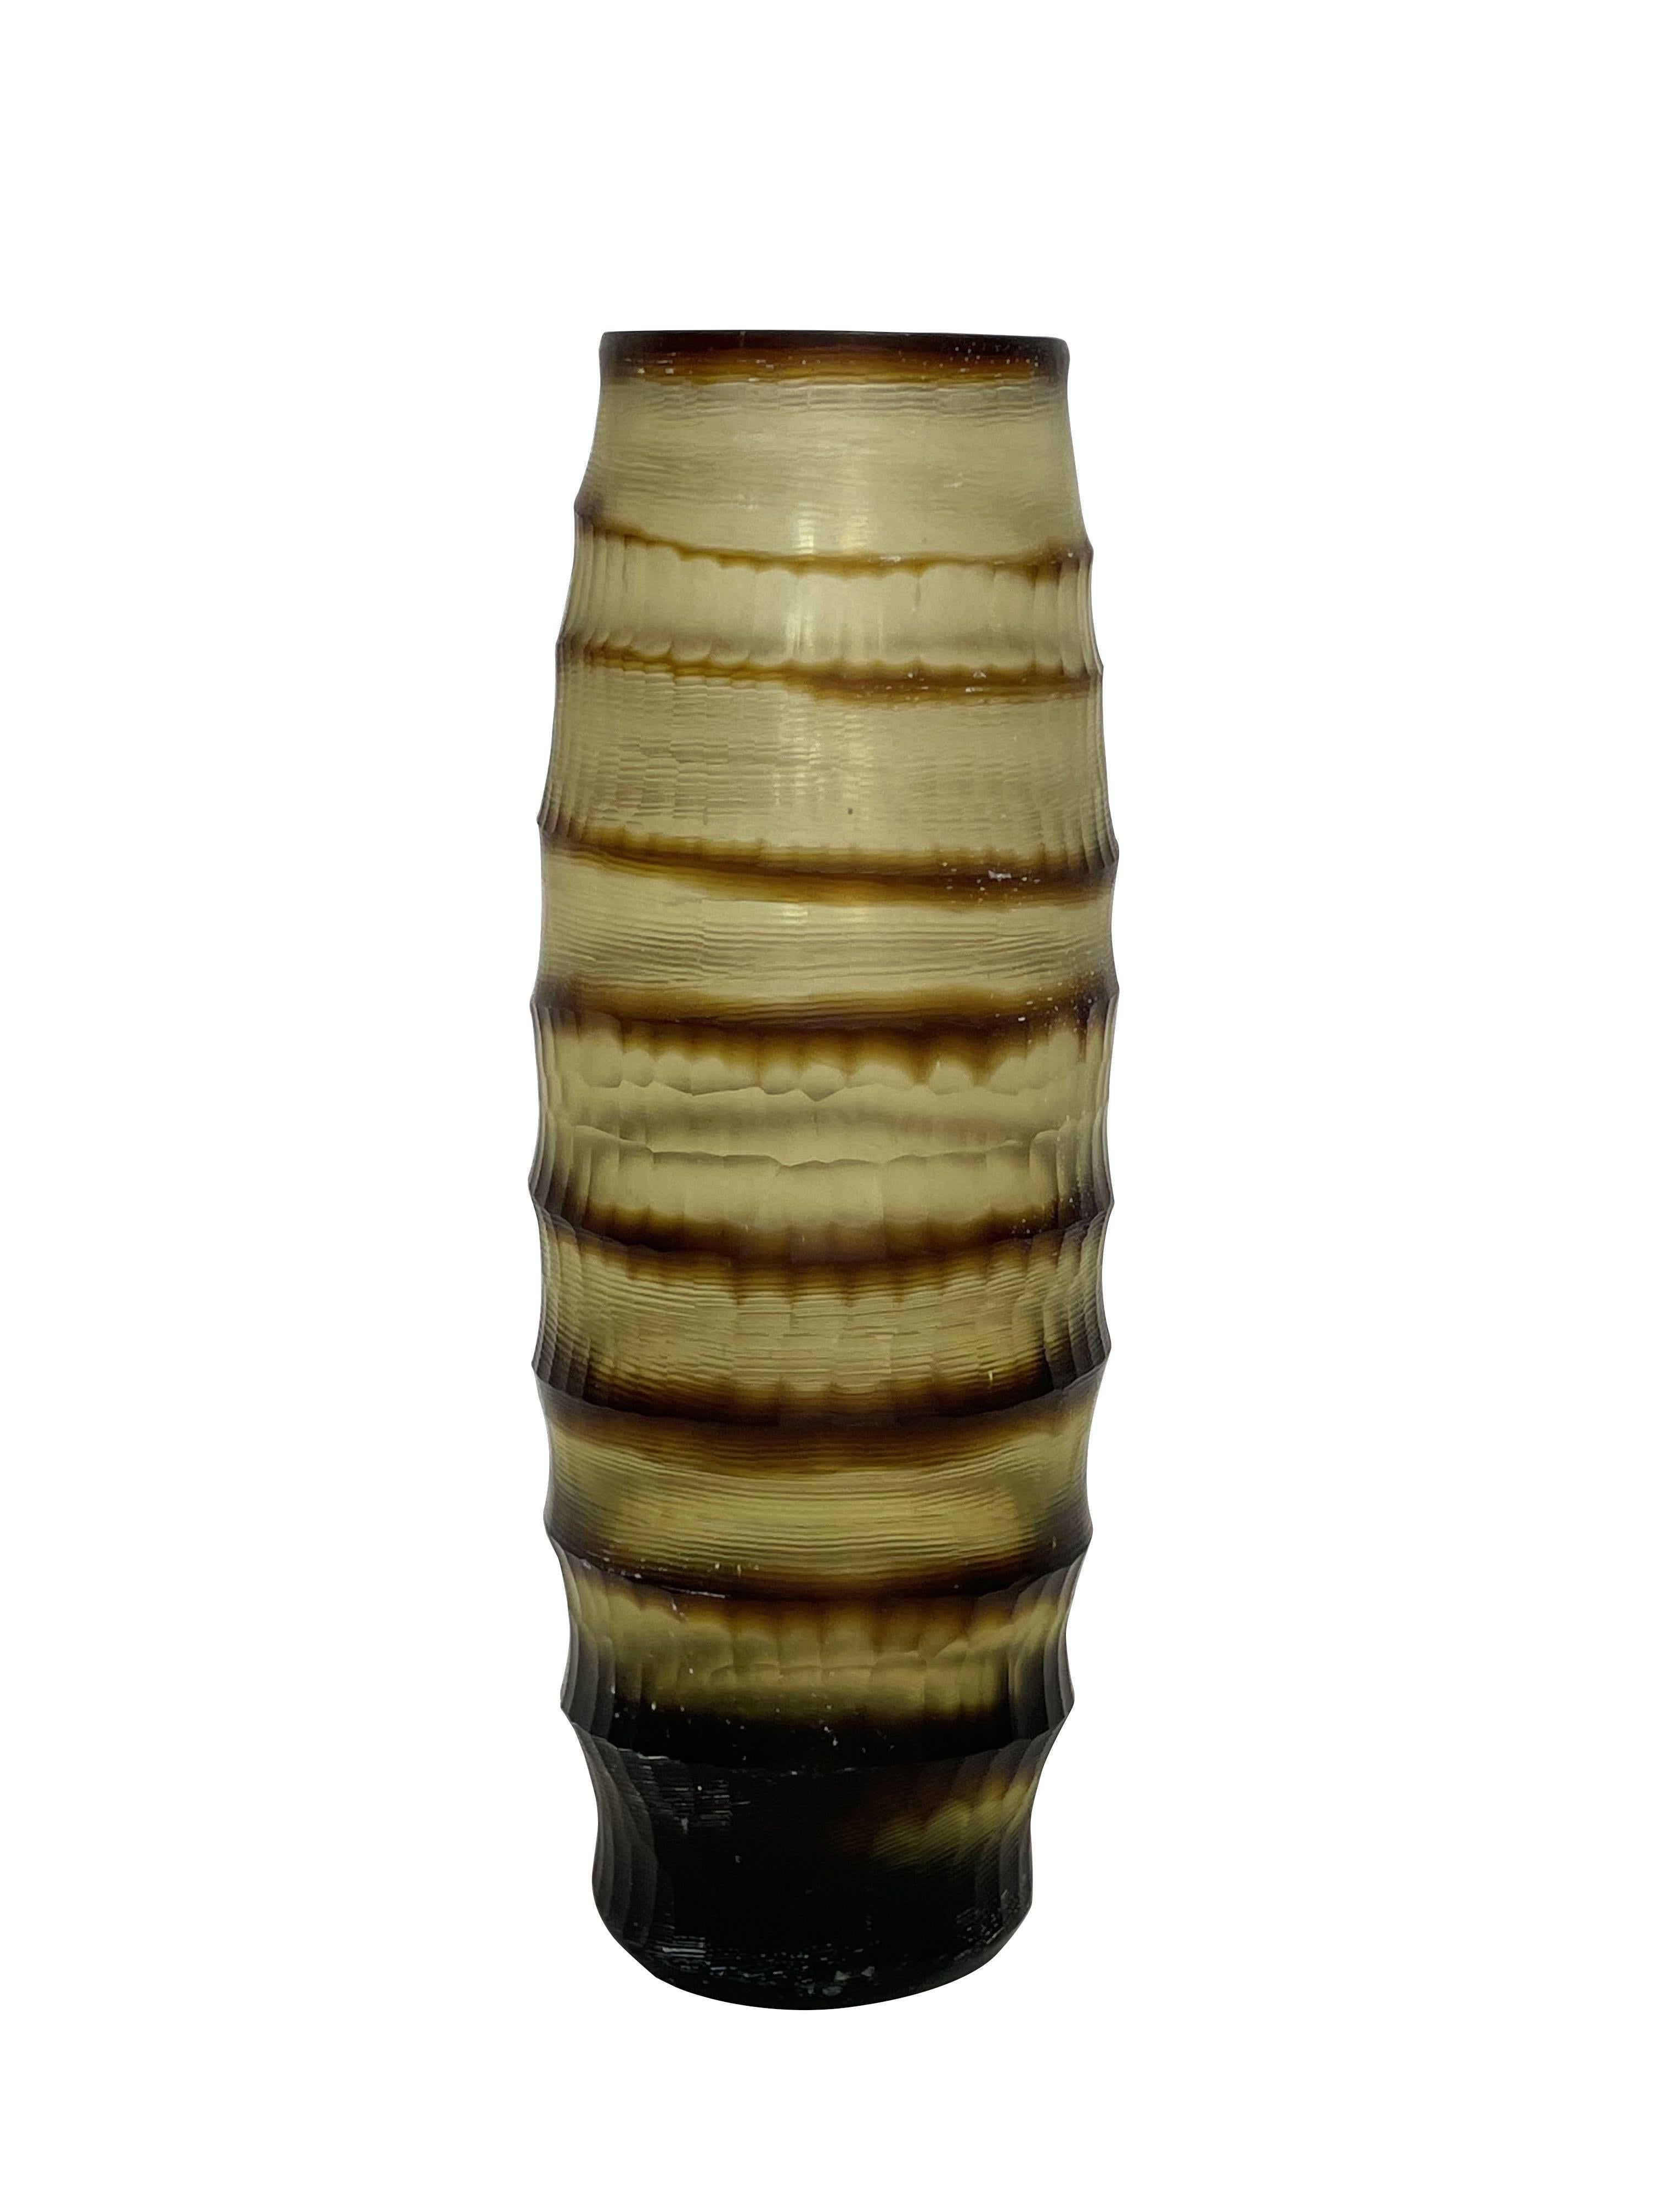 Contemporary Romanian horizontal ribbed and striped brown glass vase.
Tall cylinder shape.
Sits well with shorter version S6113.